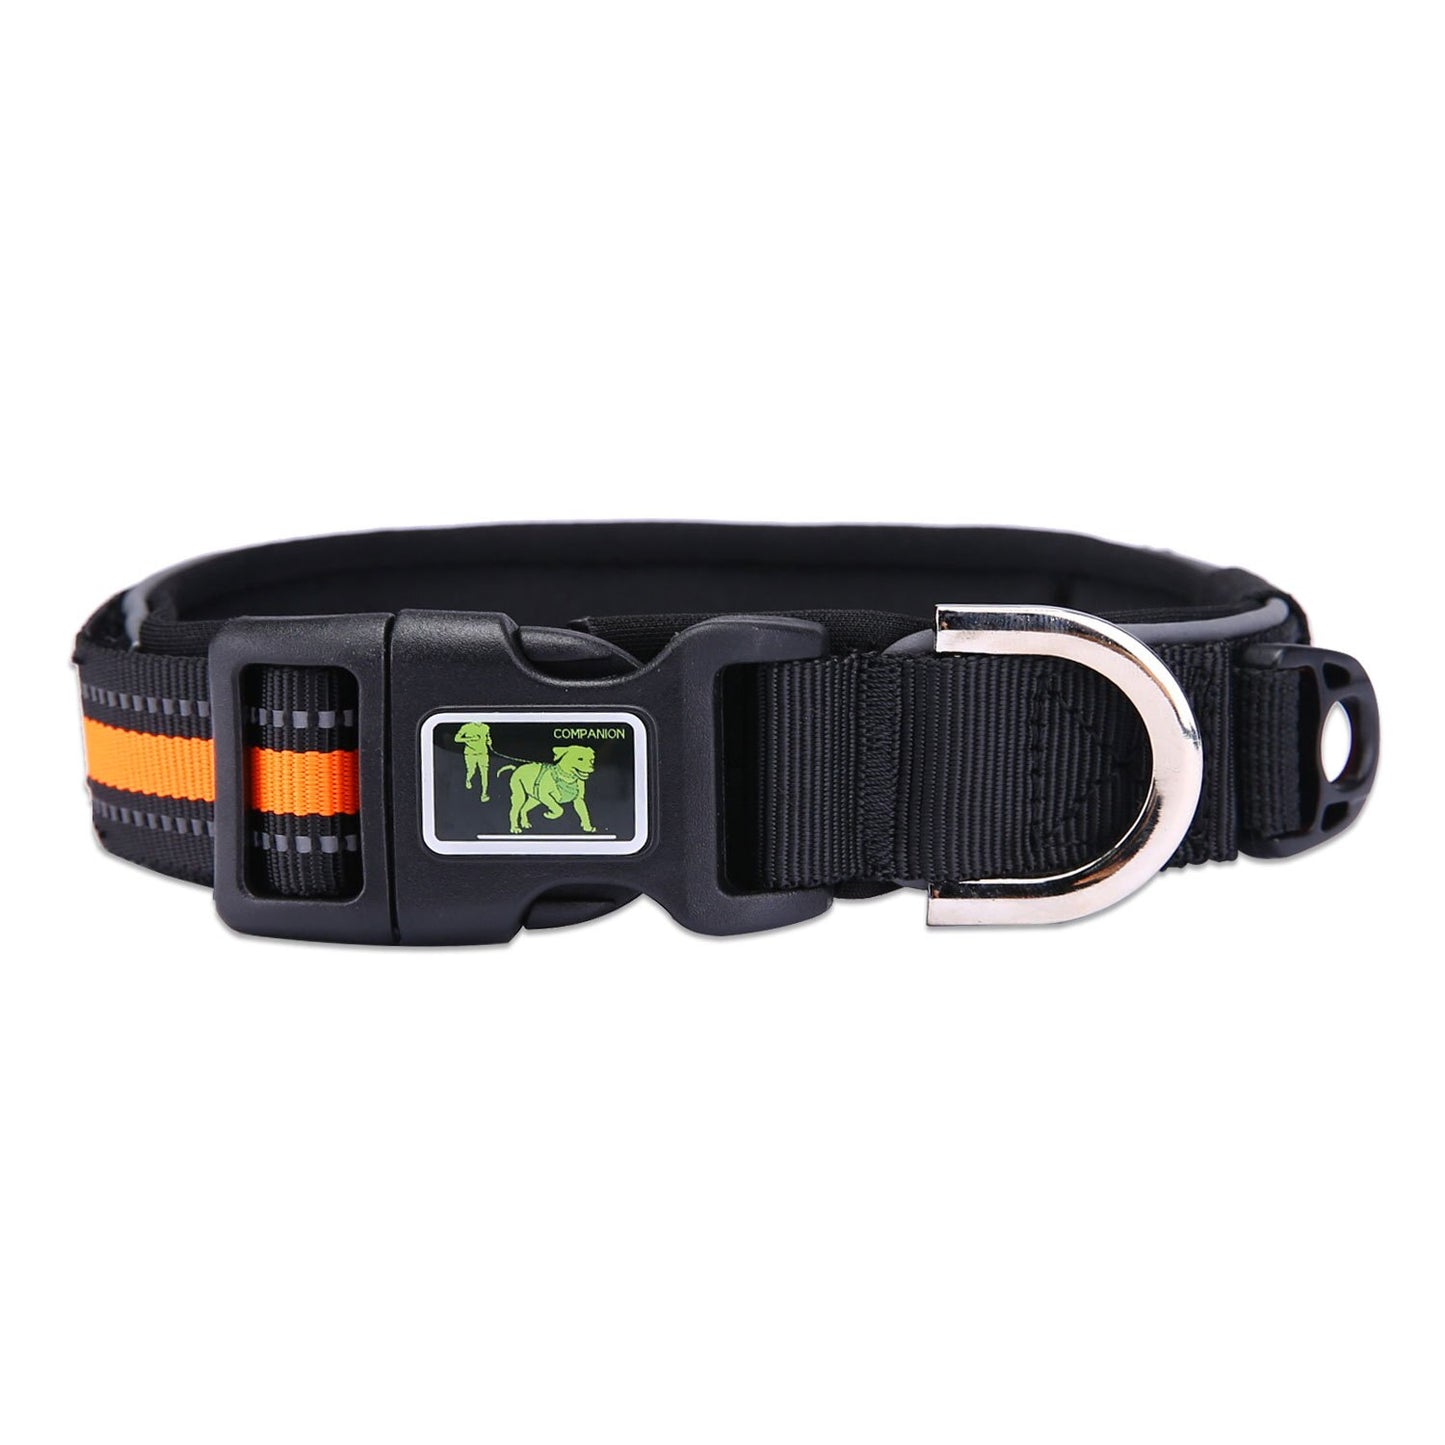 Dog Accessories  Dog Accessory   Pet Supplies New Dog Reflective Collar Large and Small  Leash Pet Collar  Pet  Accessories